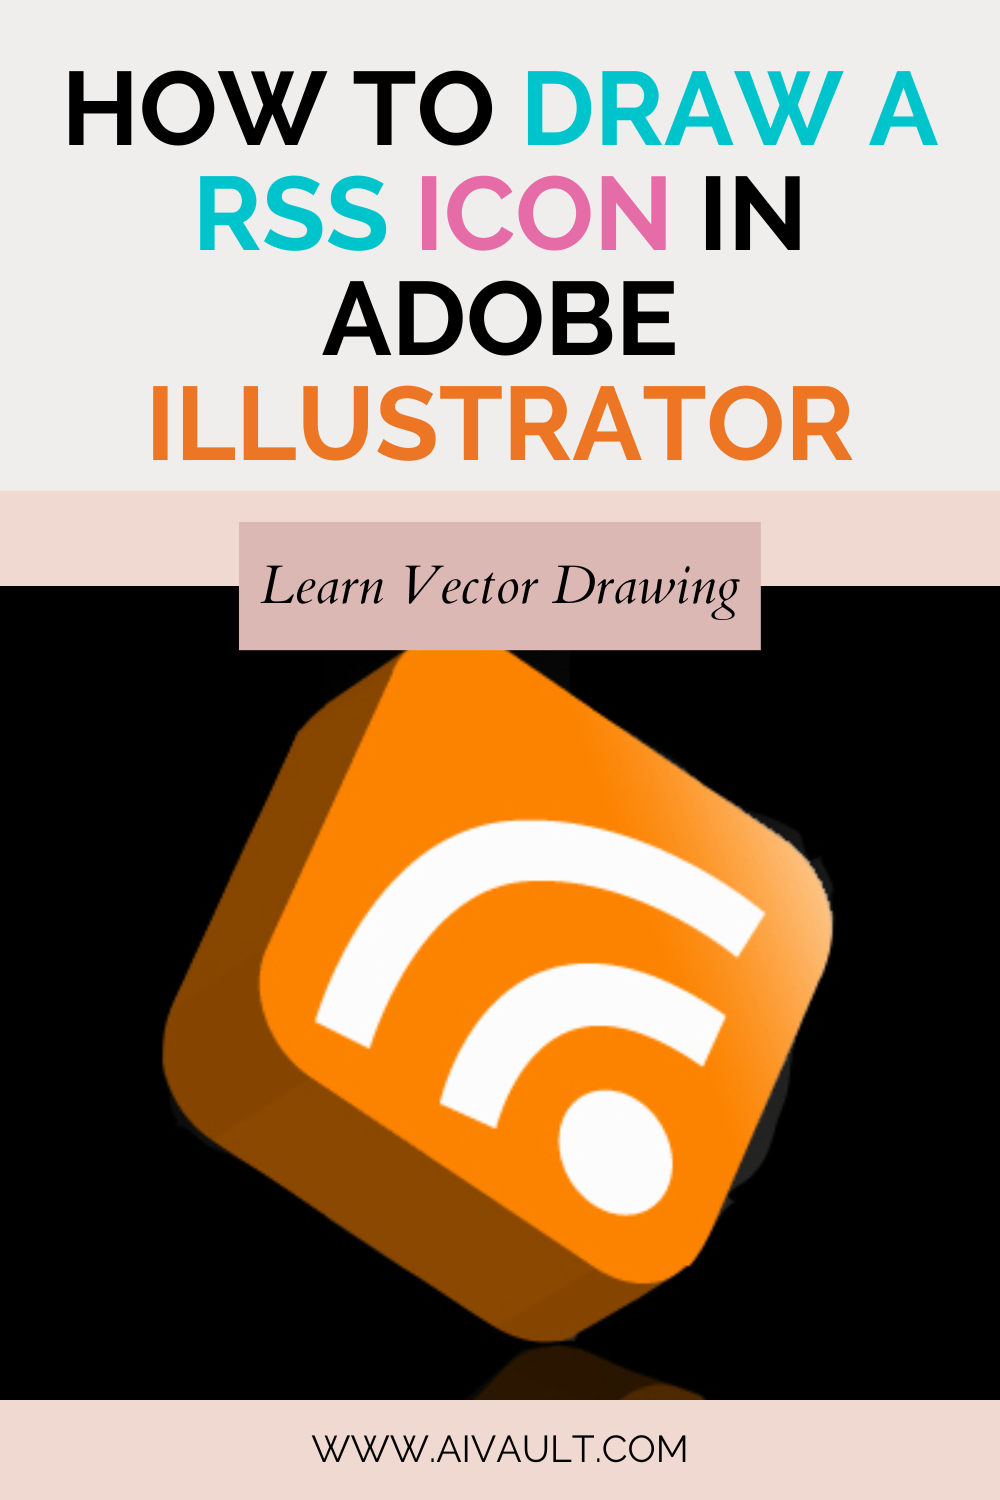 adobe illustrator tutorial draw RSS icon in vector step by step tutorial